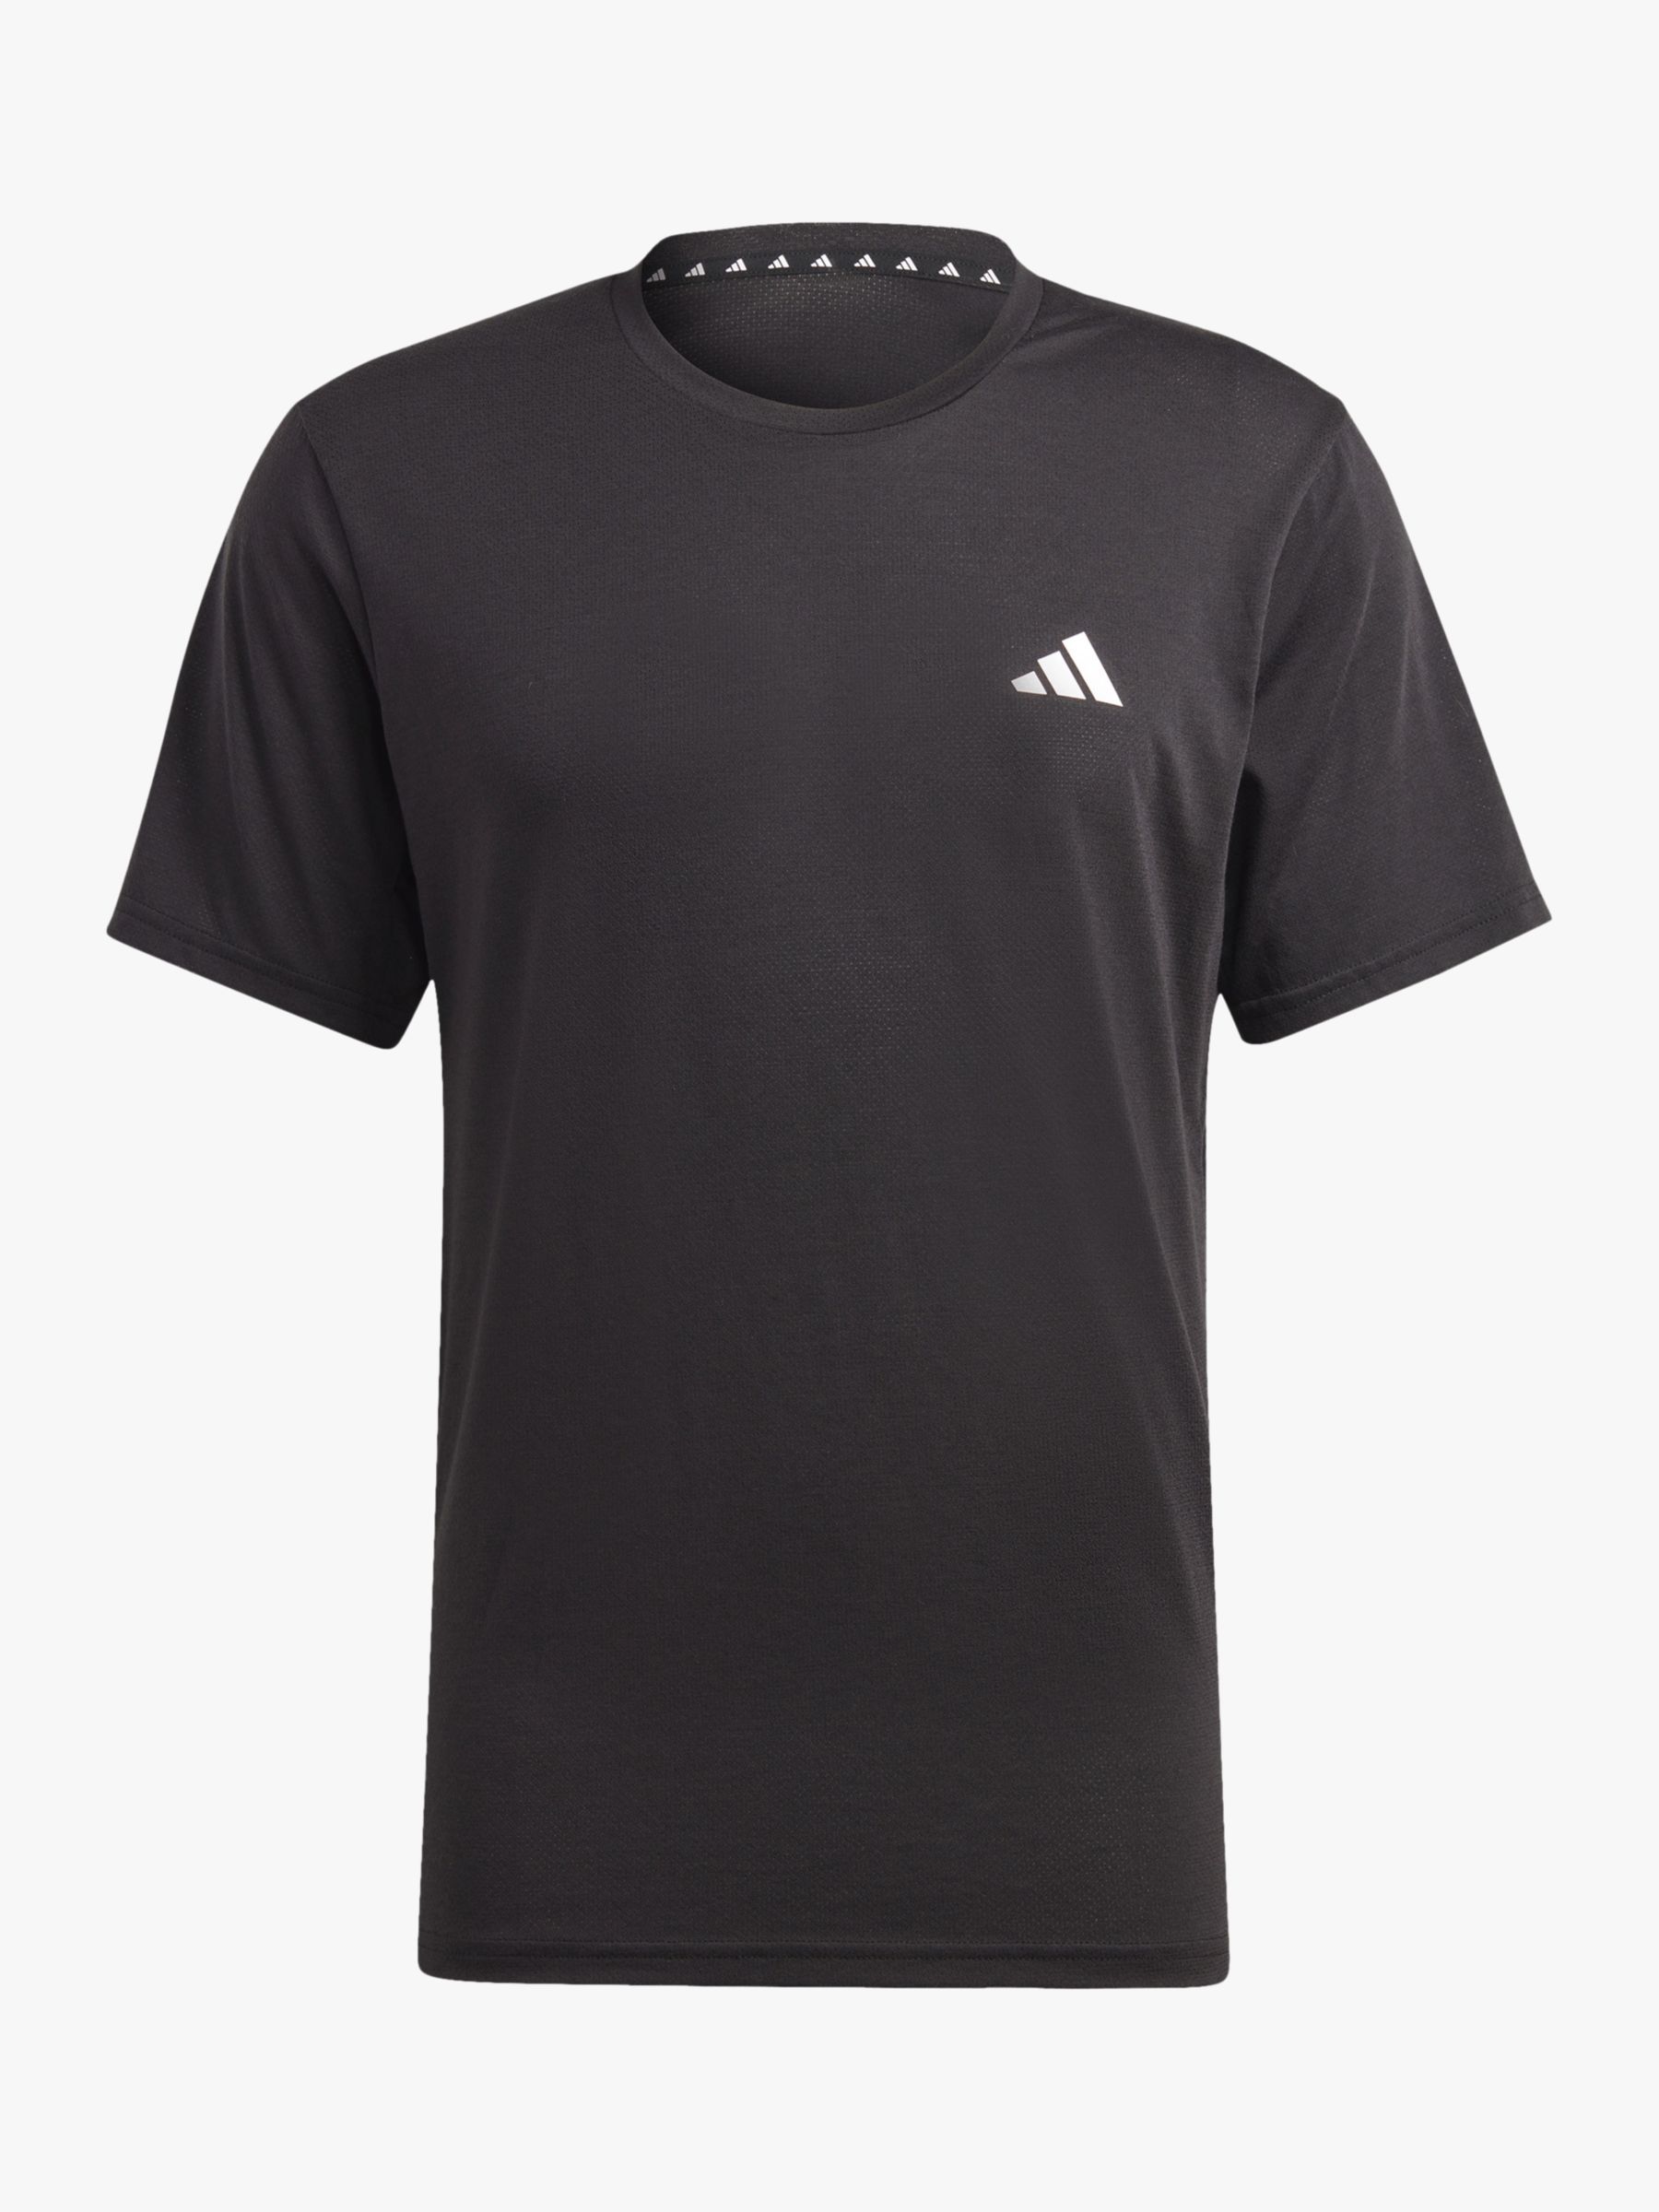 adidas Essentials Comfort Recycled Gym Top, Black/White, S